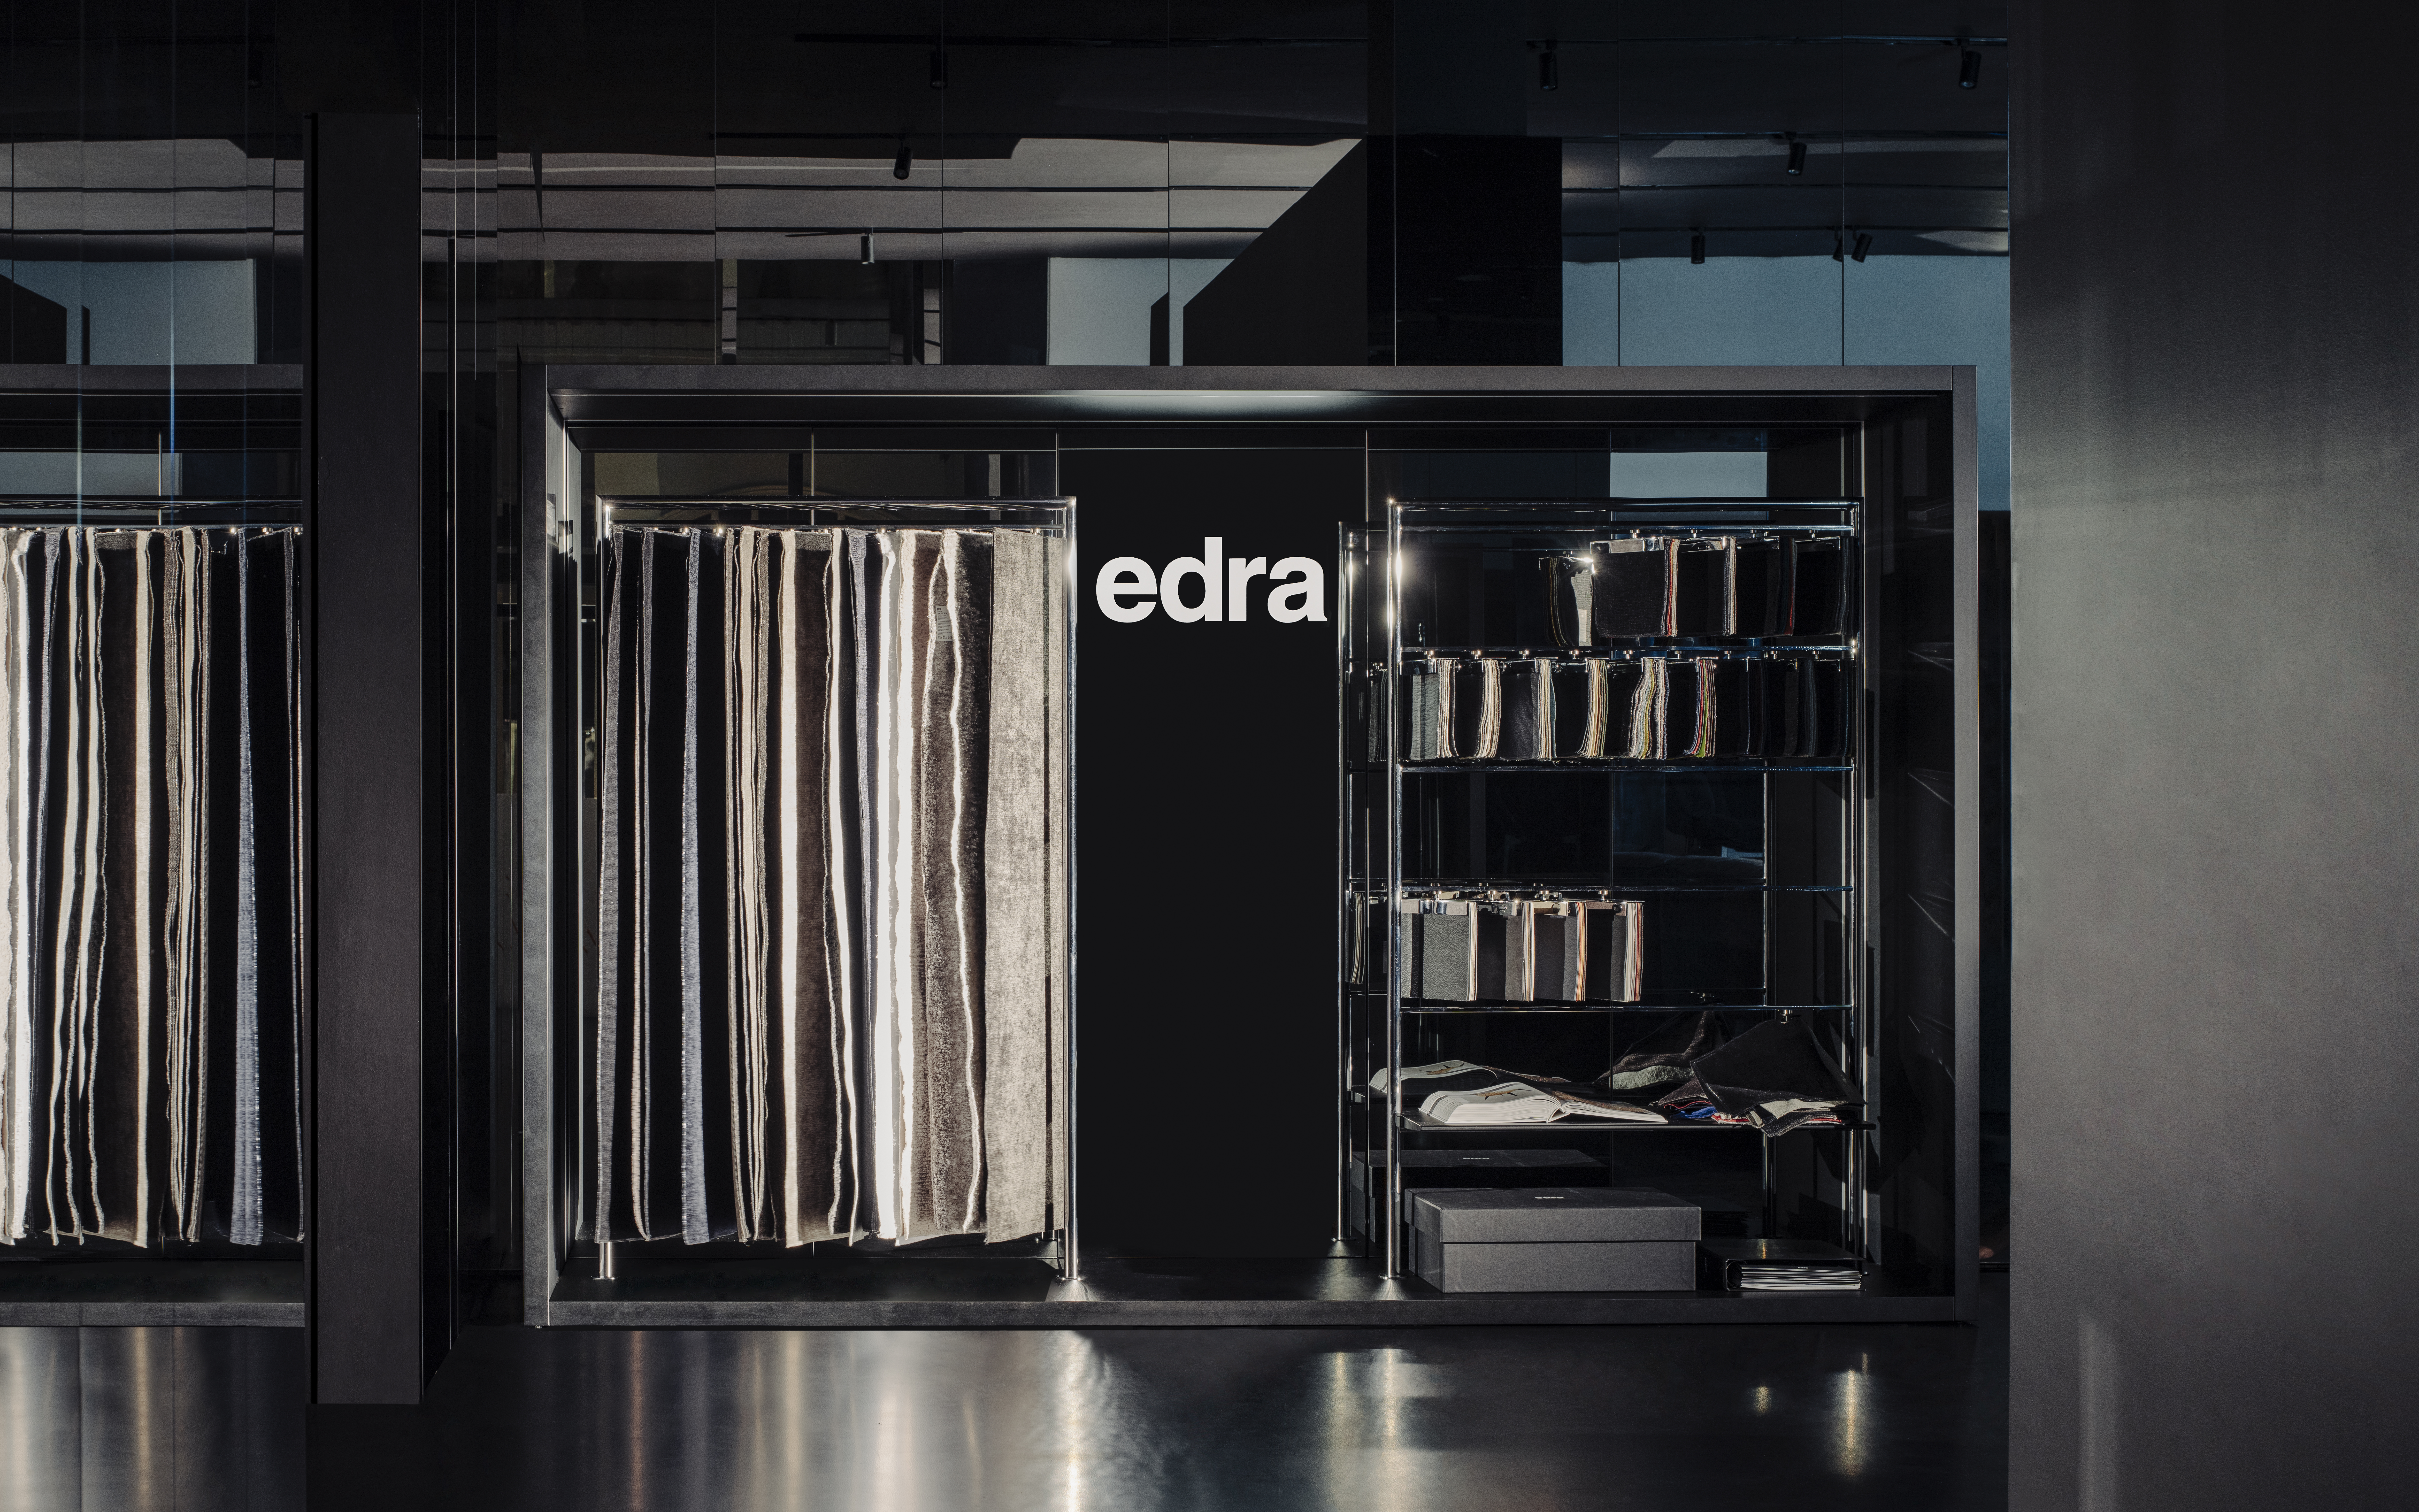 The Edra library of fabrics, each one specially developed to meet both comfort and function. Photo credit: Khoogj.